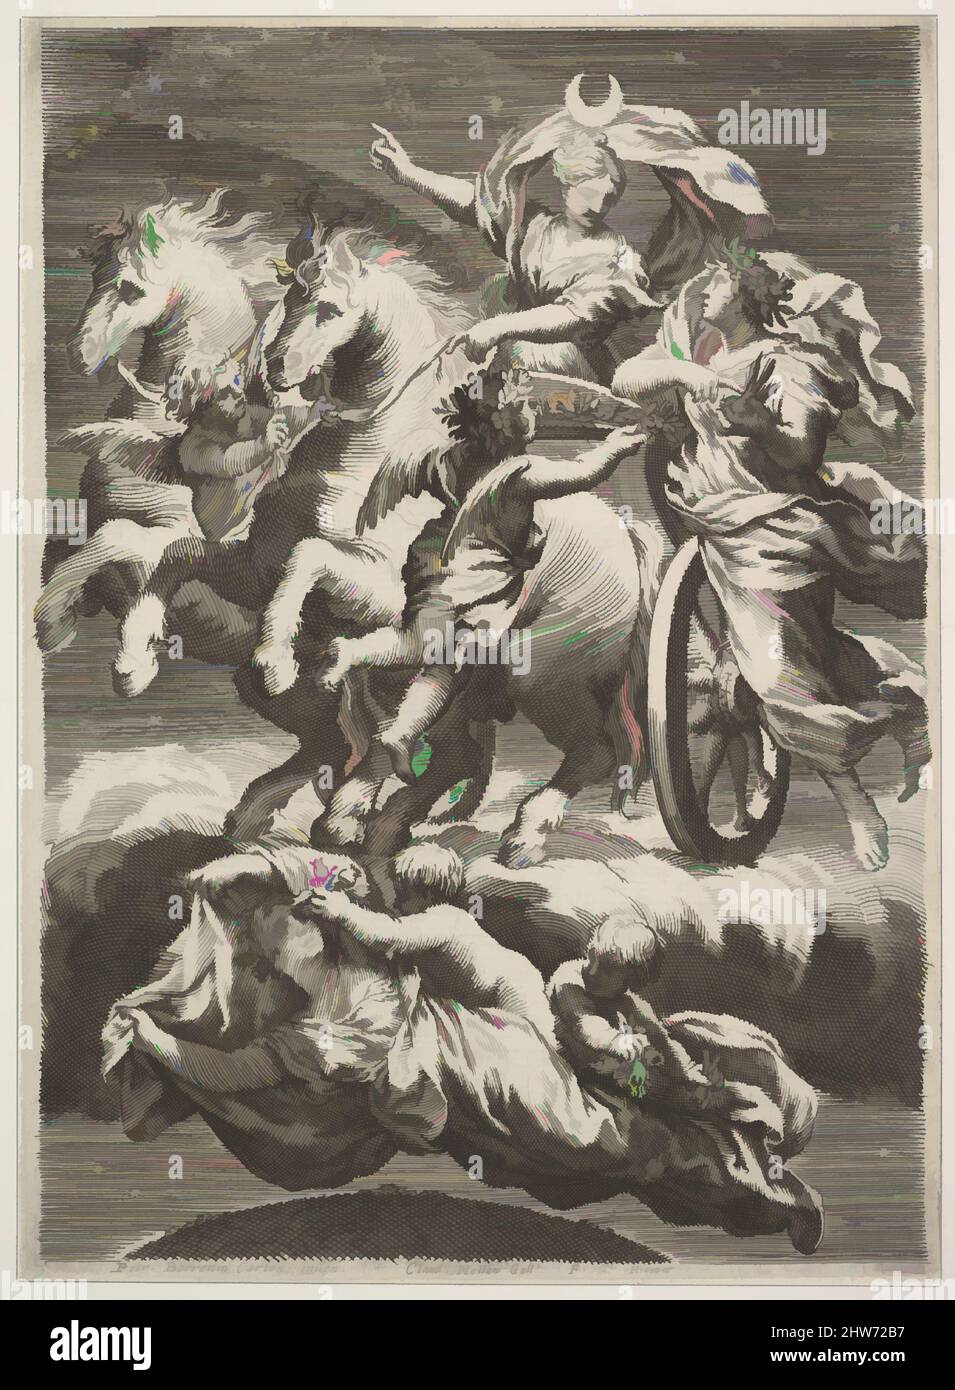 Art inspired by Diana in Her Chariot (La Lune sur son char), 1633, Engraving, sheet: 10 15/16 x 7 1/2 in. (27.8 x 19 cm), Prints, Claude Mellan (French, Abbeville 1598–1688 Paris), After Pietro da Cortona (Pietro Berrettini) (Italian, Cortona 1596–1669 Rome, Classic works modernized by Artotop with a splash of modernity. Shapes, color and value, eye-catching visual impact on art. Emotions through freedom of artworks in a contemporary way. A timeless message pursuing a wildly creative new direction. Artists turning to the digital medium and creating the Artotop NFT Stock Photo